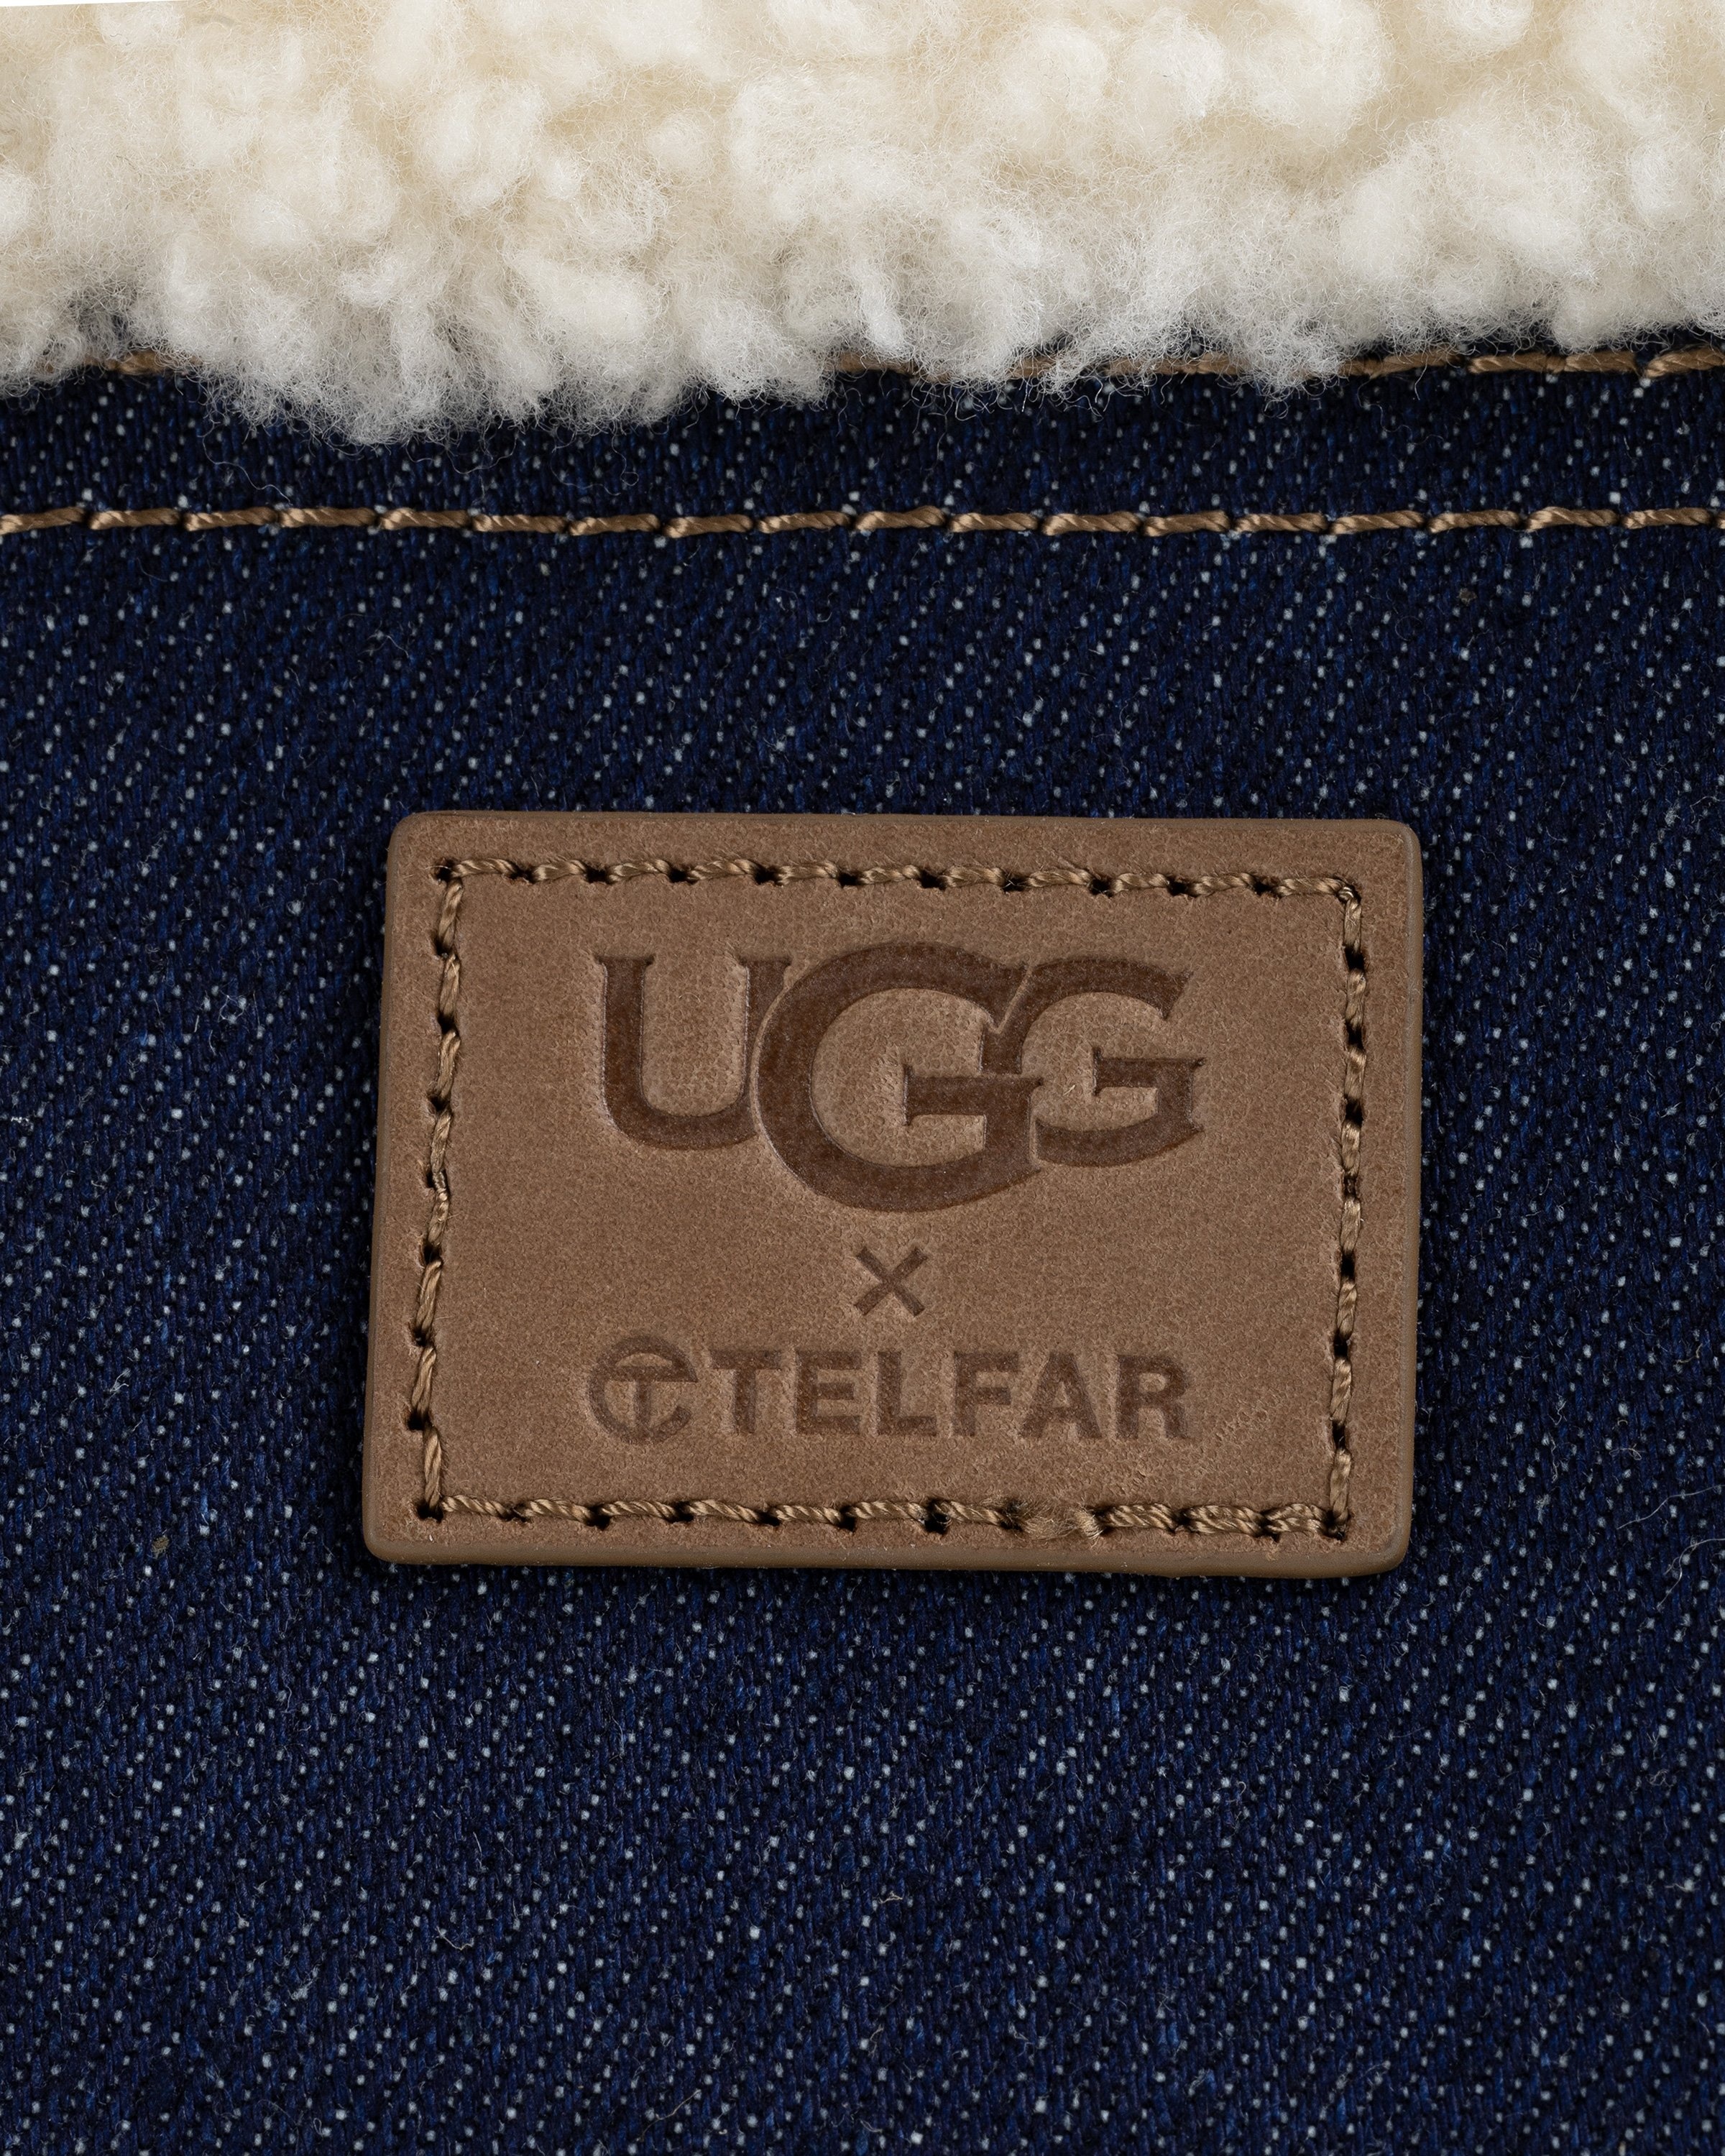 Telfar and UGG Unveil New Denim Bags and Apparel